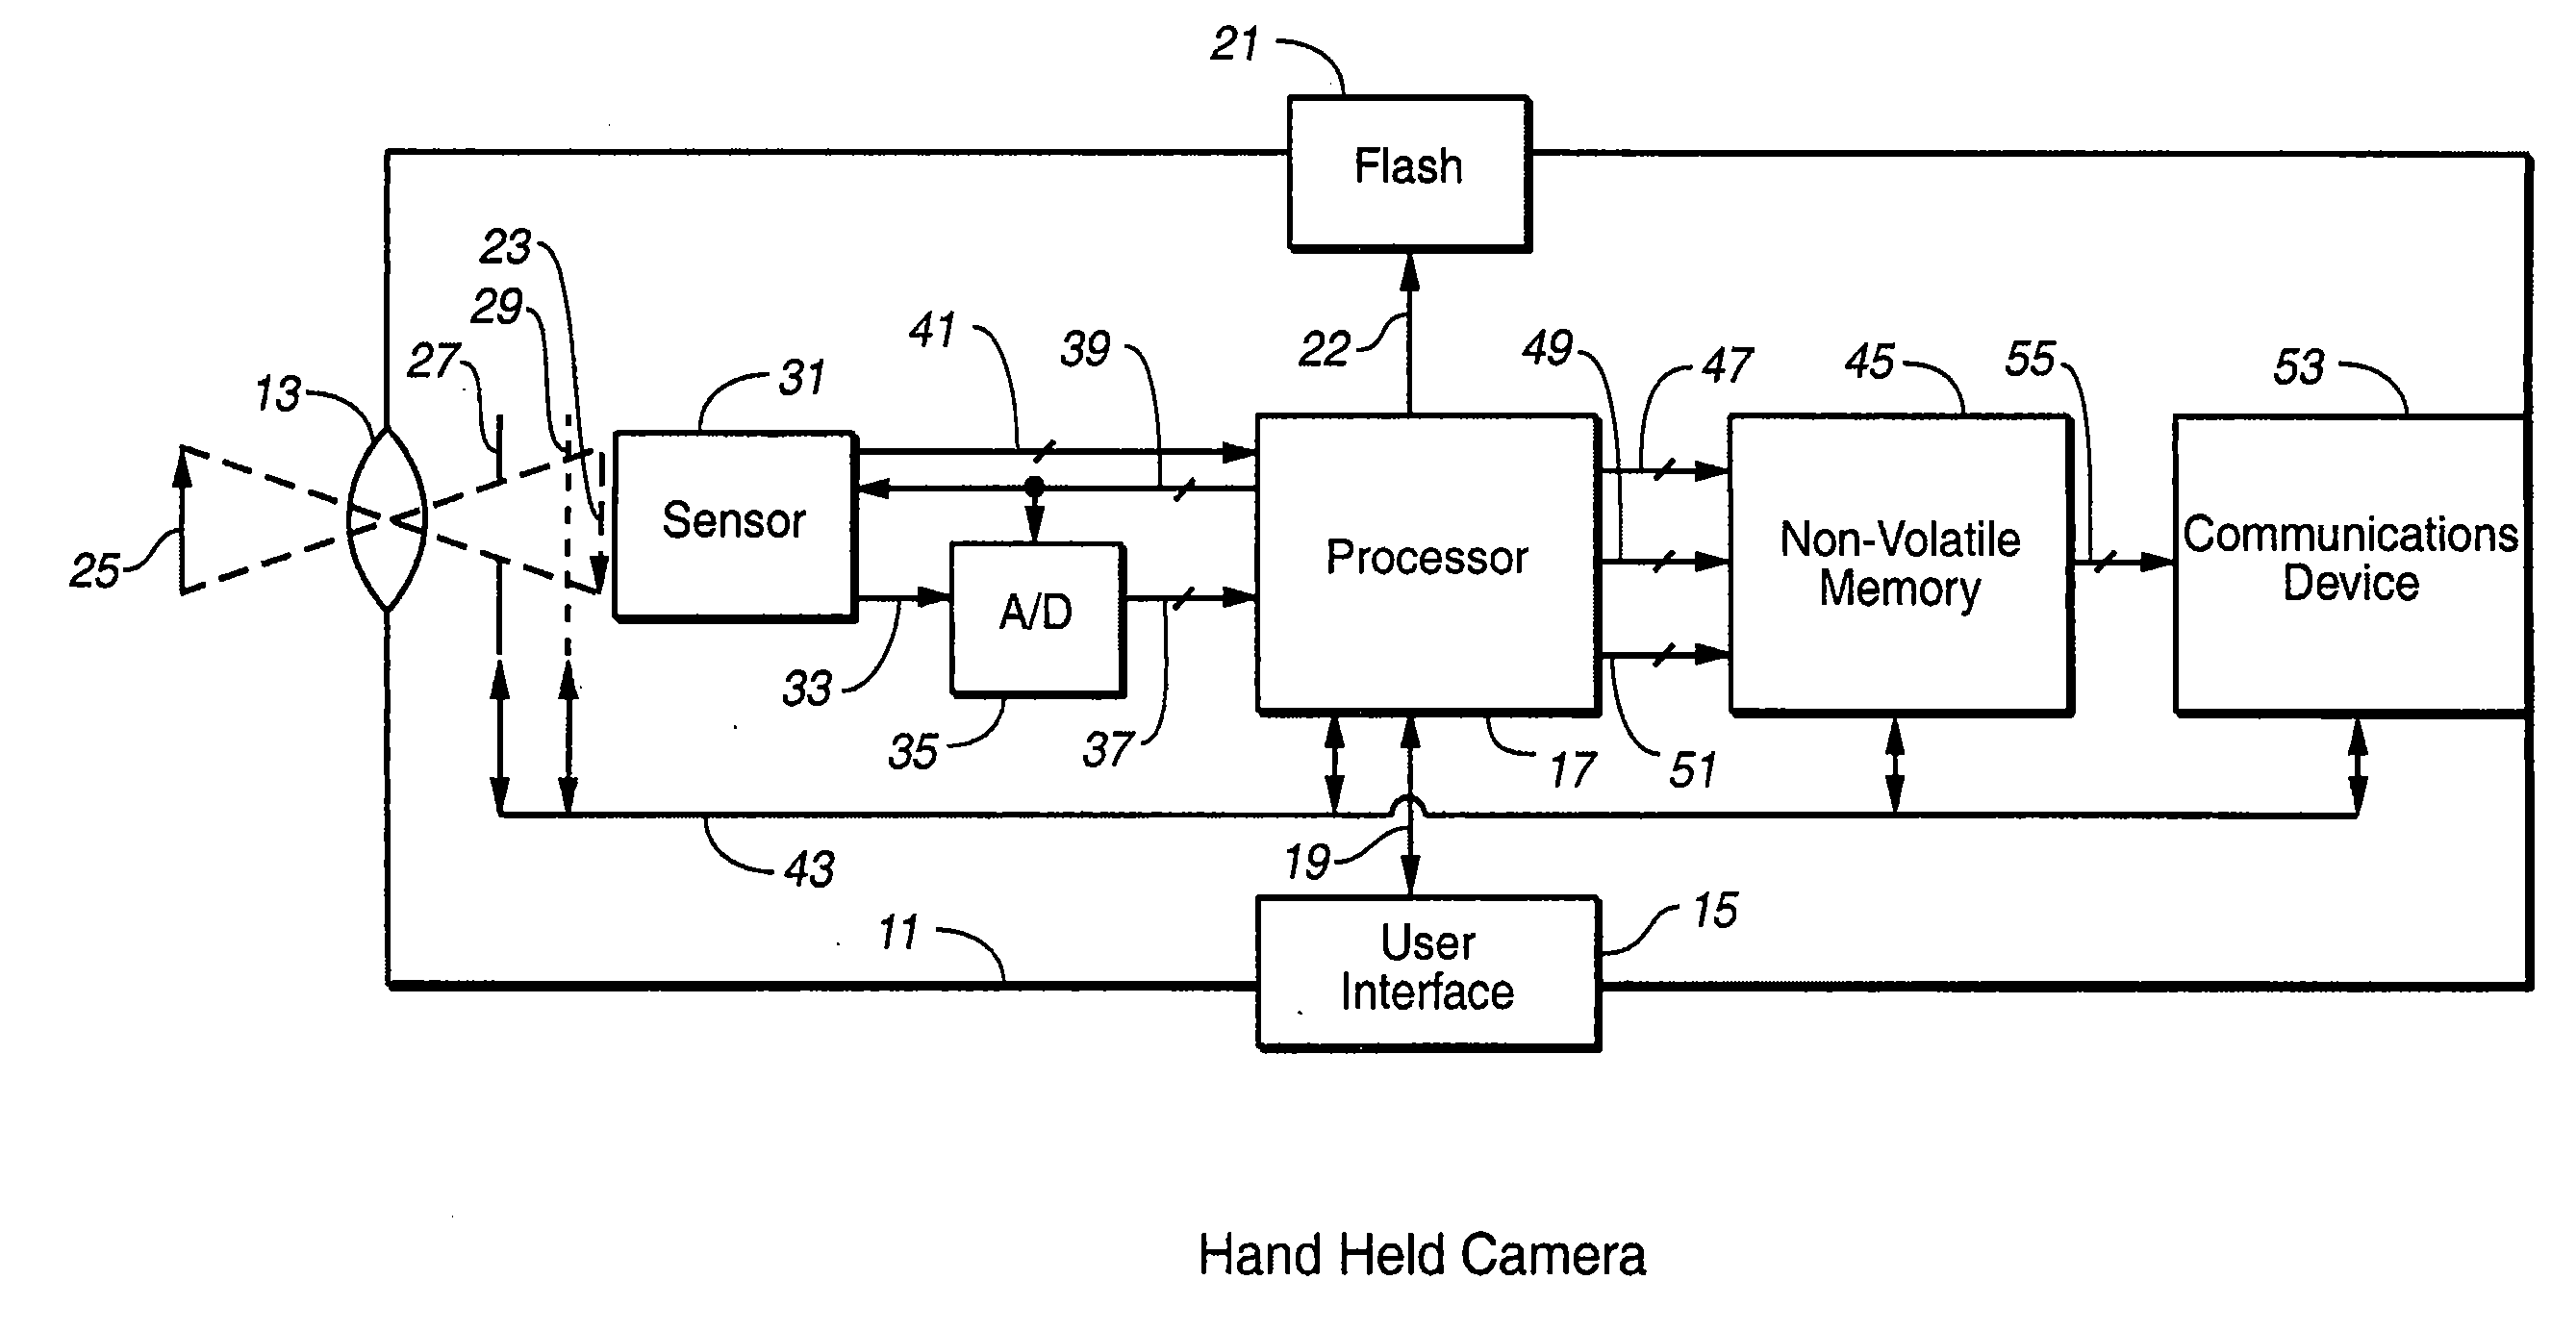 Digital camera with reduced image buffer memory and minimal processing for recycling through a service center